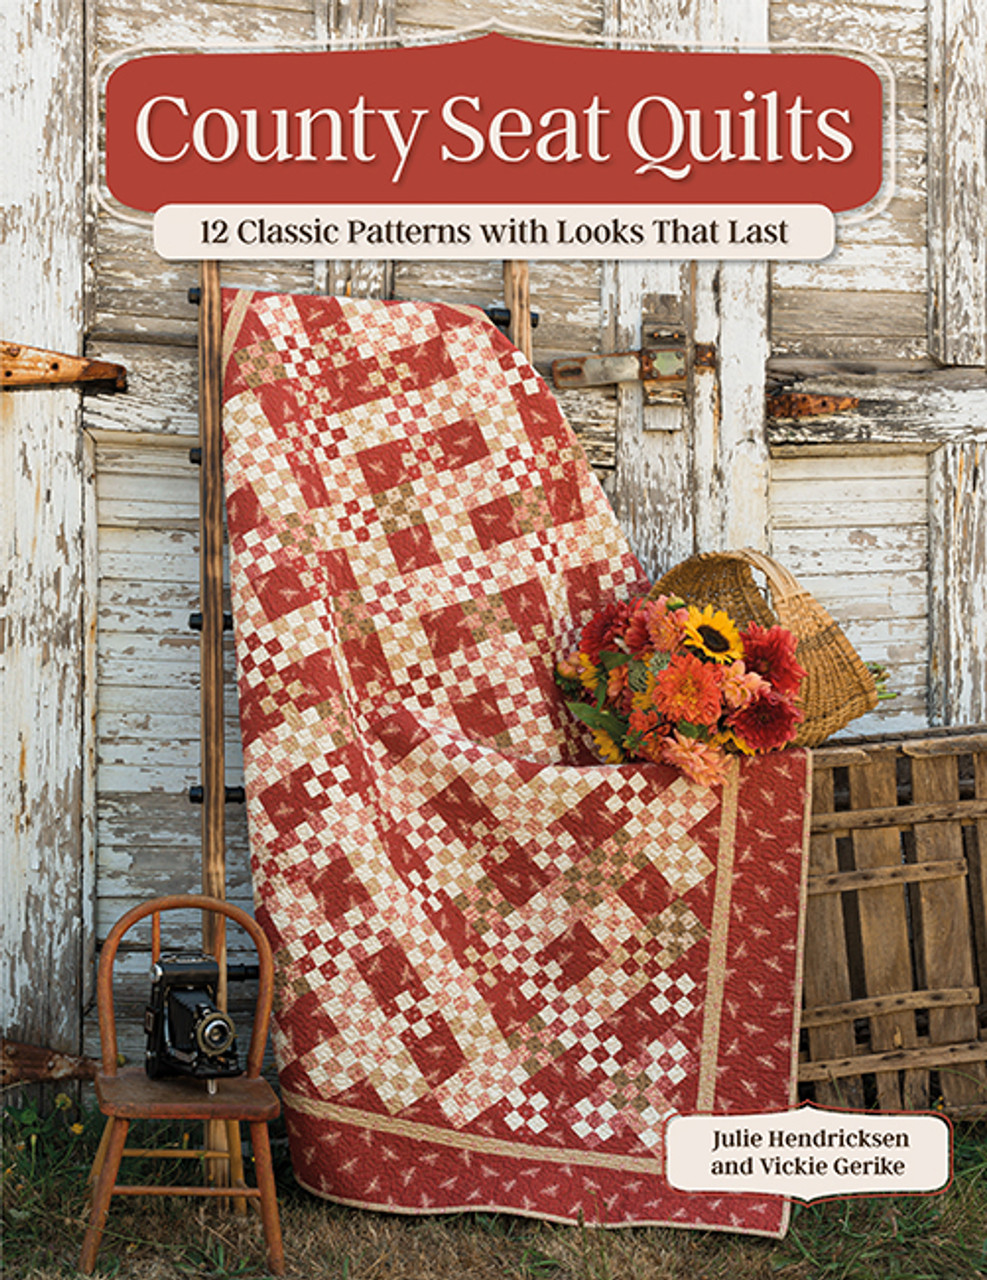 County Seat Quilts - 12 Classic Patterns with Looks That Last